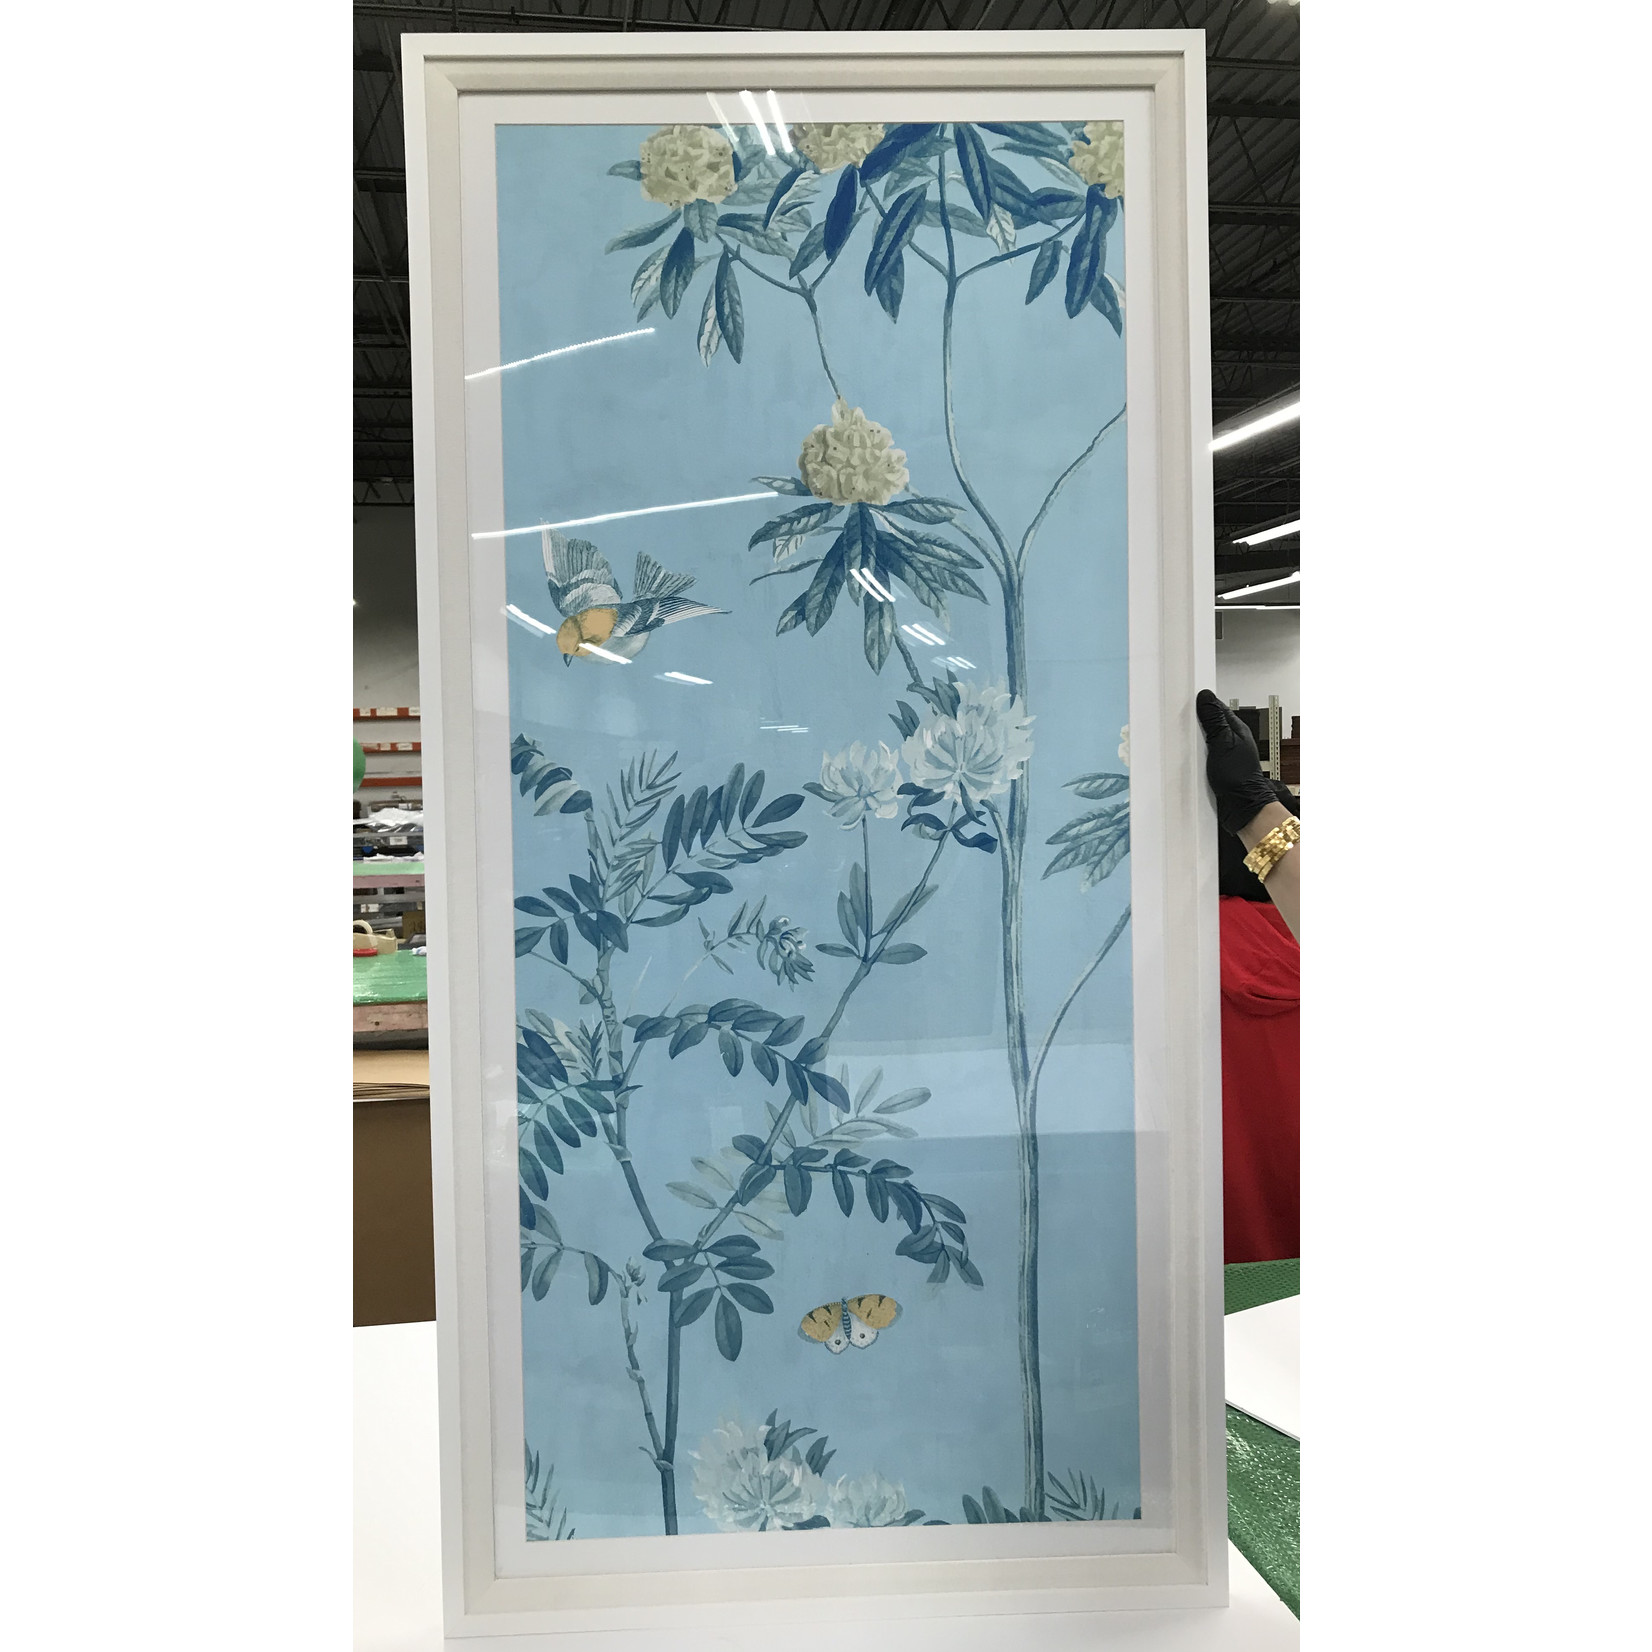 Framed Print on Rag Paper: Scenic Floral Triptych in Powder Blue with an off-white frame 30 x 60 each panel